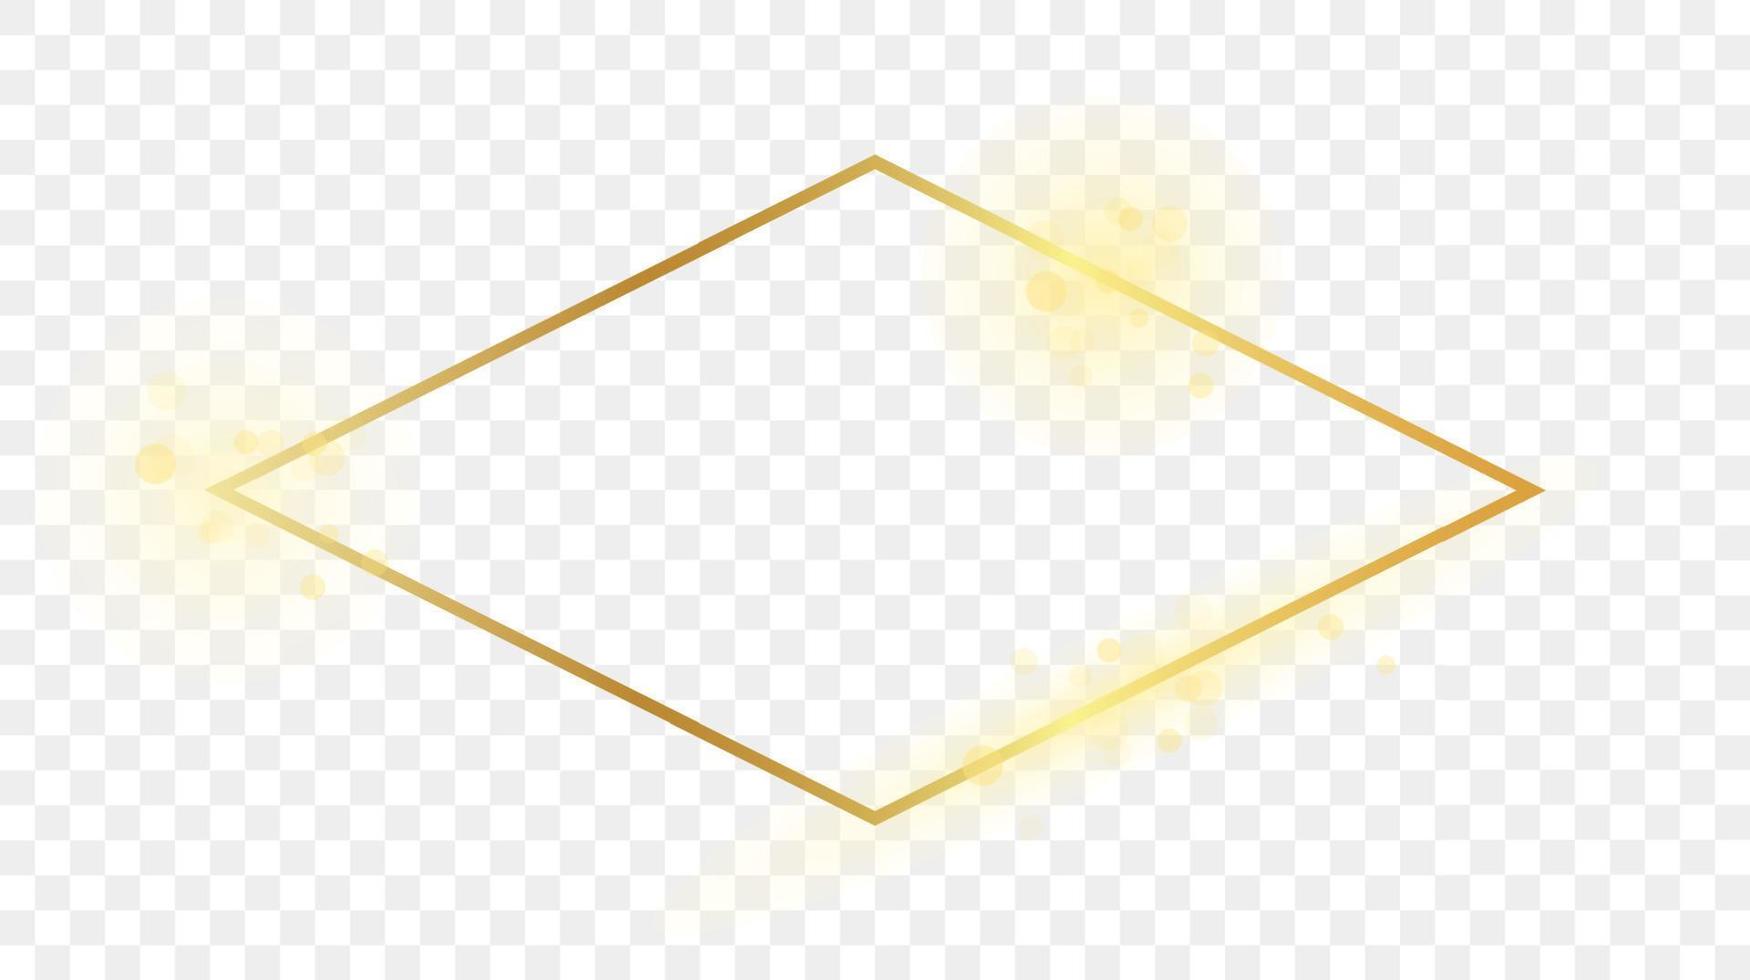 Gold glowing rhombus shape frame isolated on background. Shiny frame with glowing effects. Vector illustration.